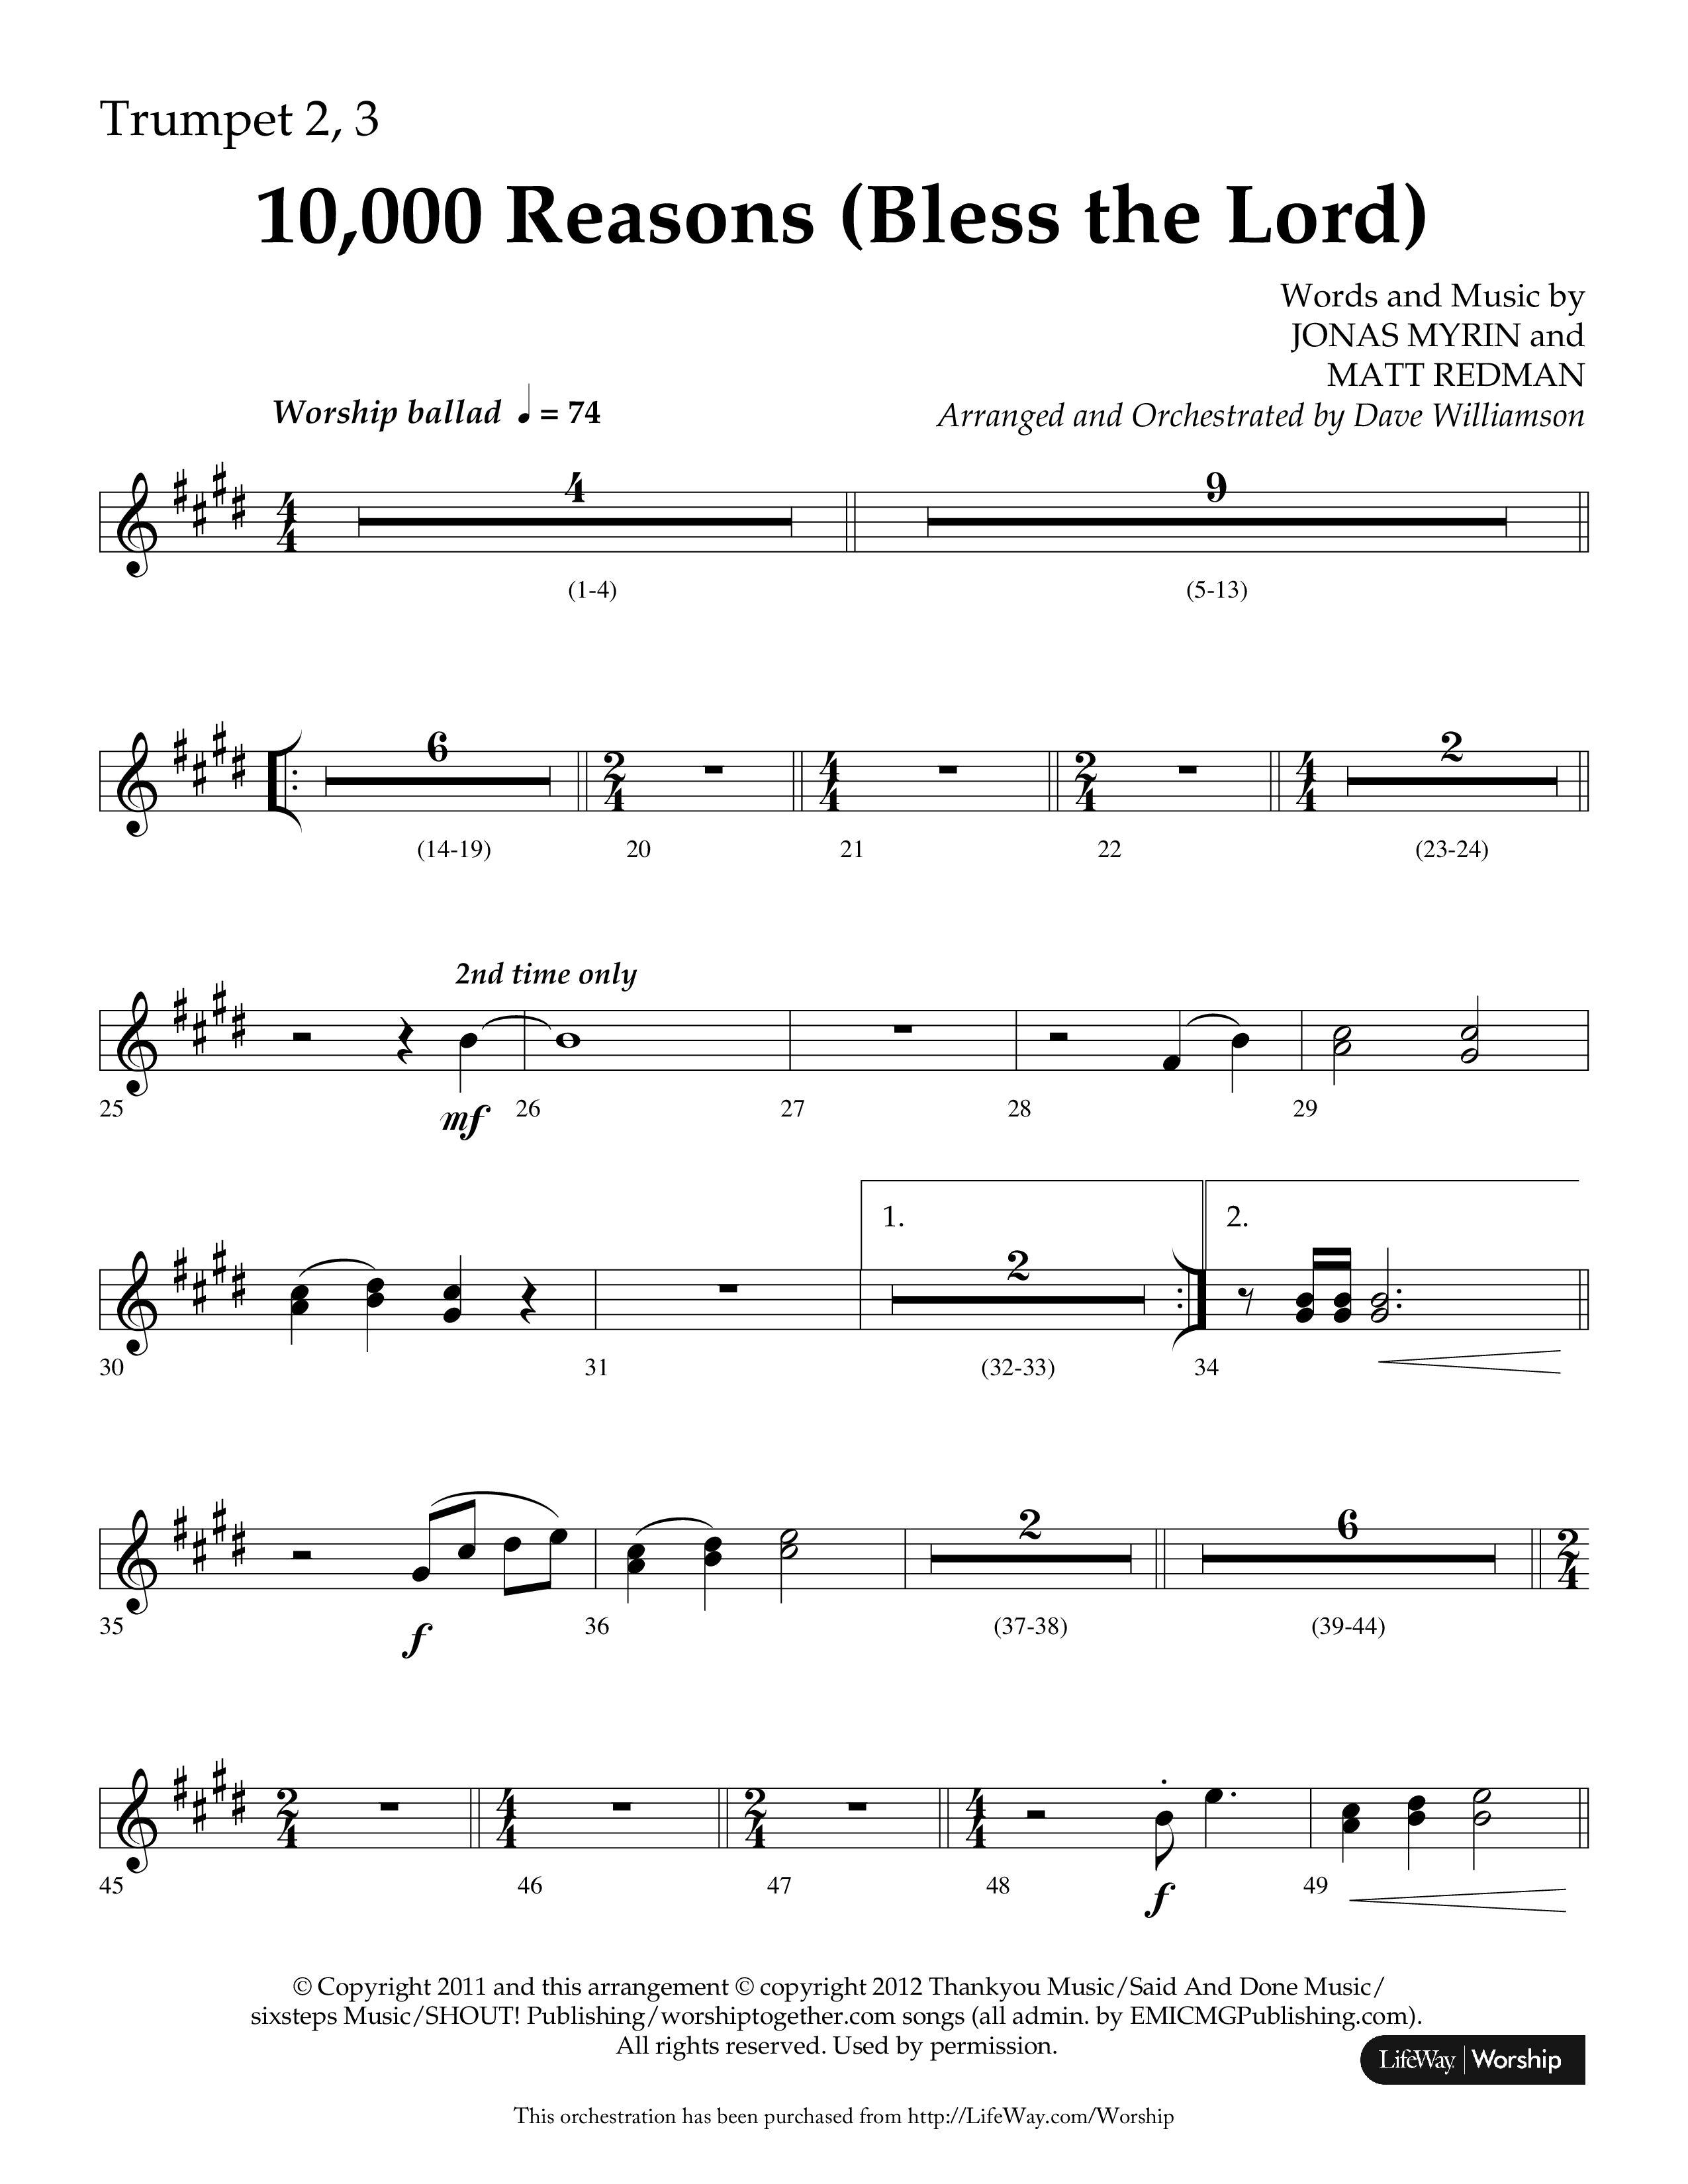 10,000 Reasons (Bless The Lord) (Choral Anthem SATB) Trumpet 2/3 (Lifeway Choral / Arr. Dave Williamson)